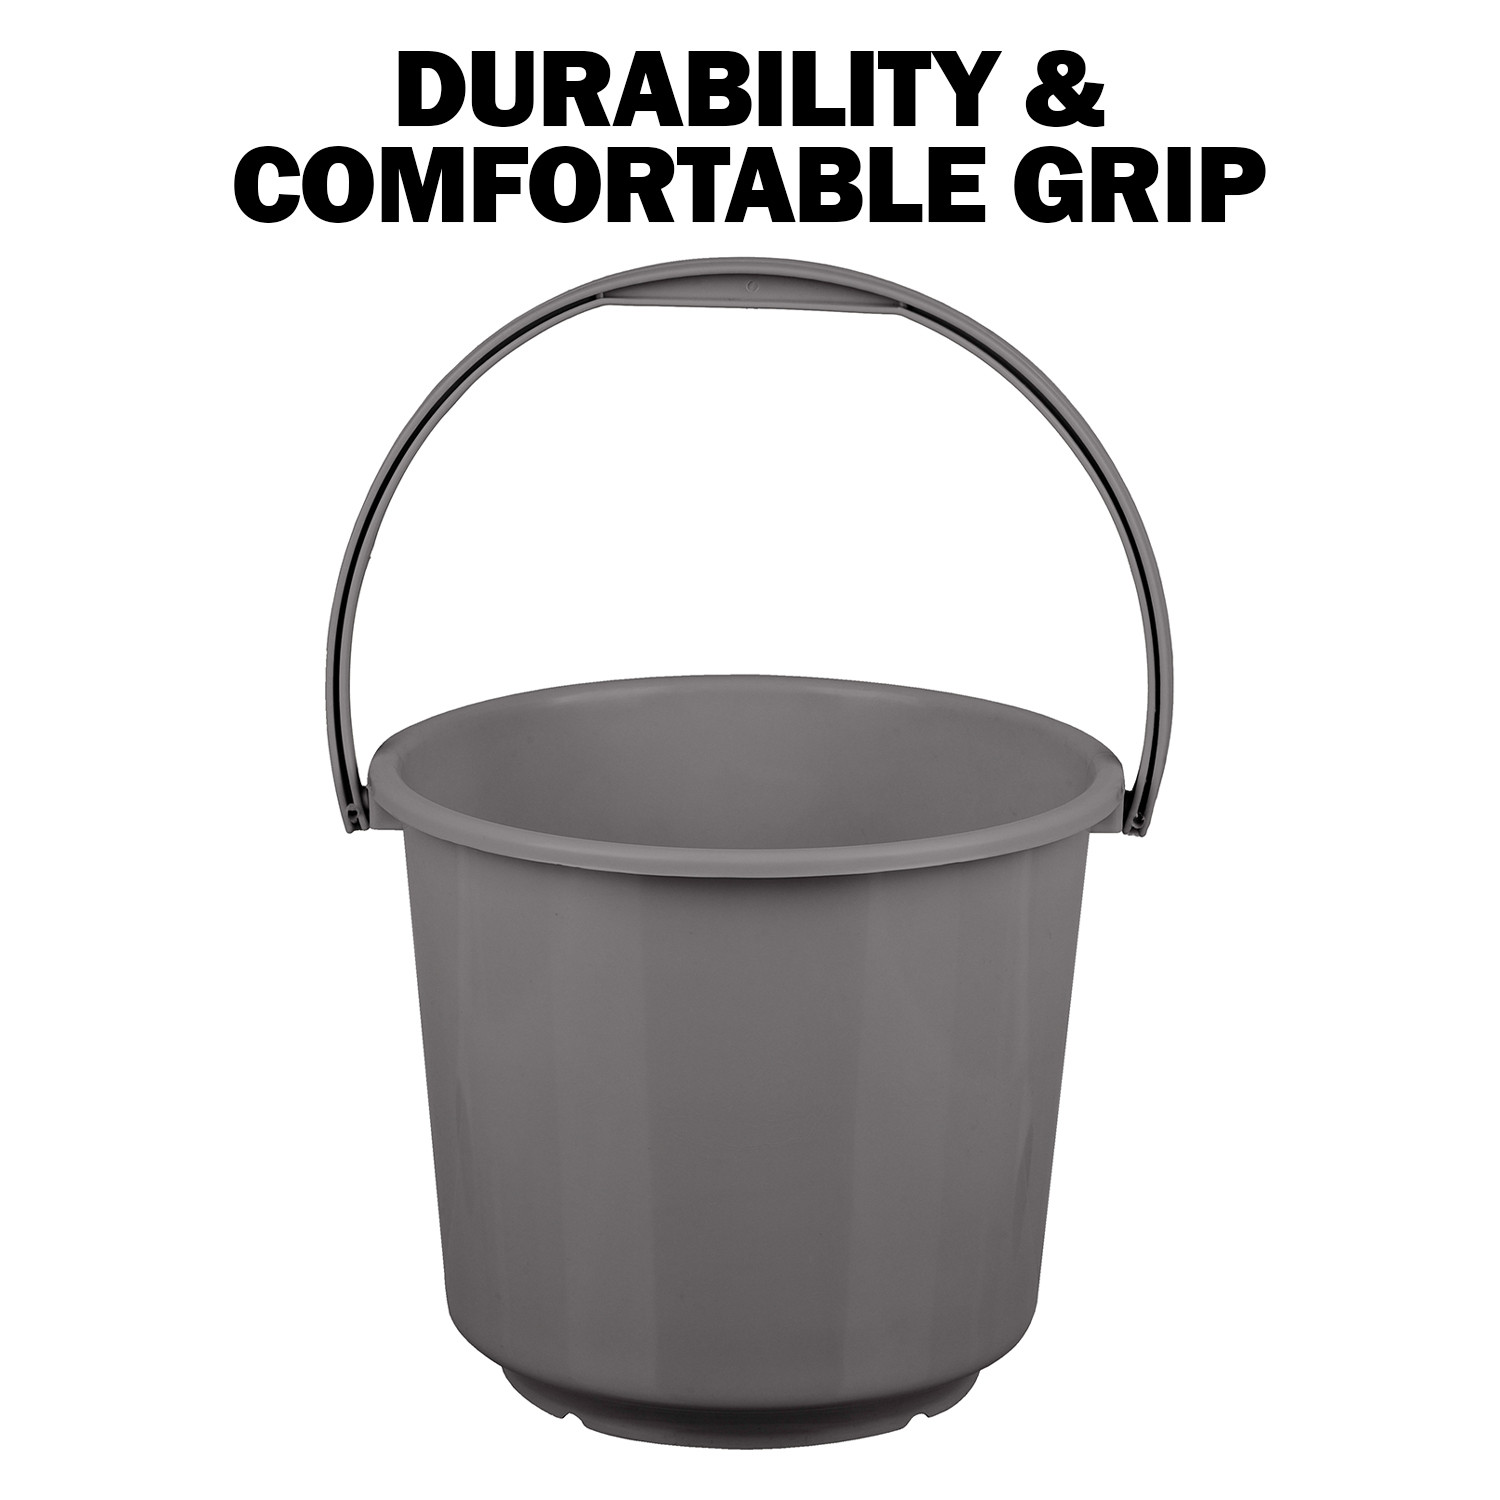 Kuber Industries Bucket | Plastic Bucket for Mopping | Bucket for Cleaning | Storage Container Bucket | Water Storage Bucket | Bathroom Bucket | Plain Bucket | 5 LTR | Gray